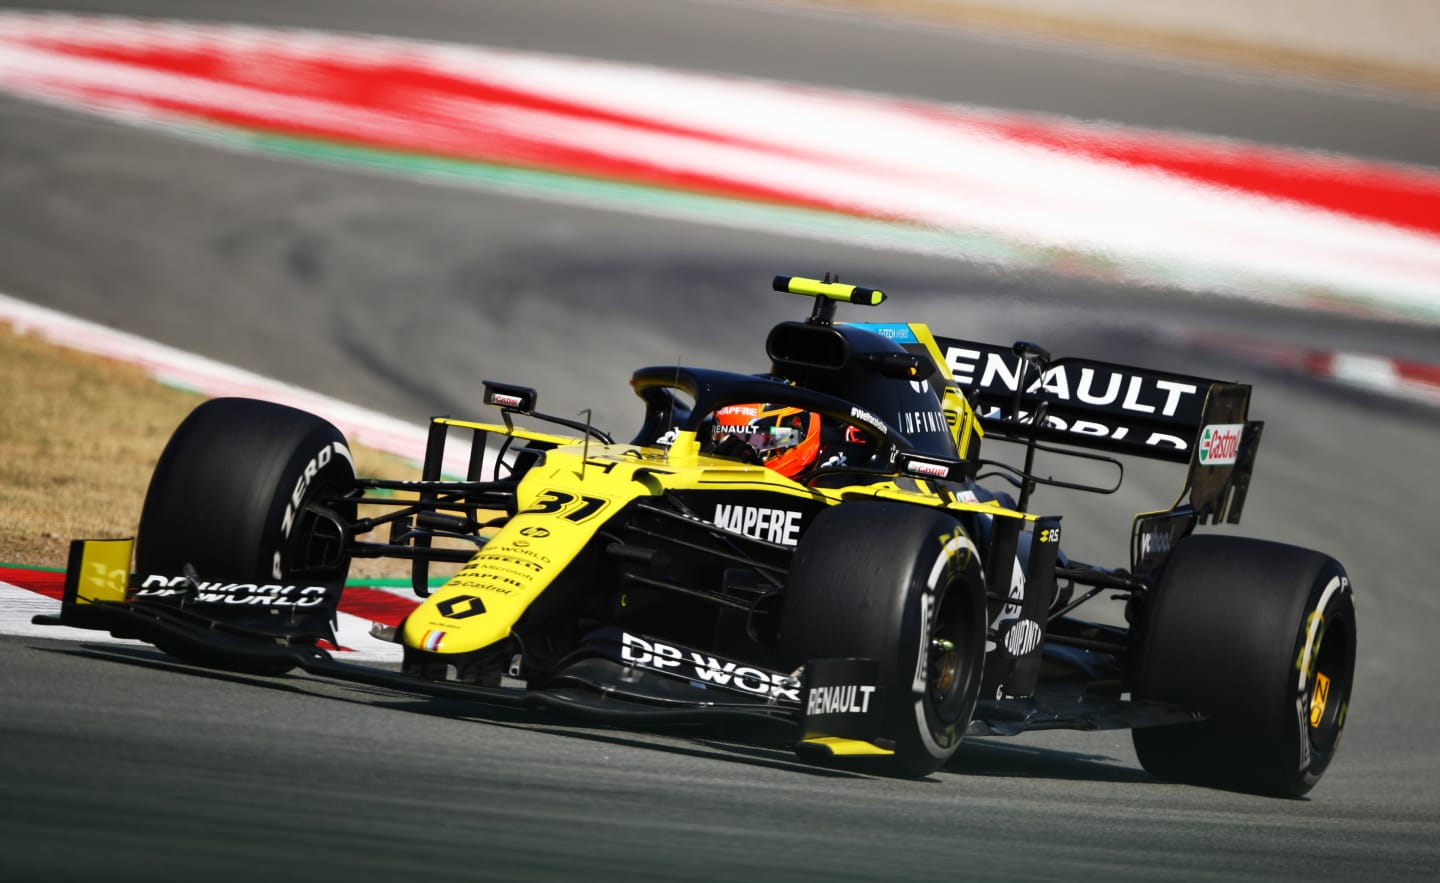 BARCELONA, SPAIN - AUGUST 14: Esteban Ocon of France driving the (31) Renault Sport Formula One Team RS20 on track during practice for the F1 Grand Prix of Spain at Circuit de Barcelona-Catalunya on August 14, 2020 in Barcelona, Spain. (Photo by Bryn Lennon/Getty Images)